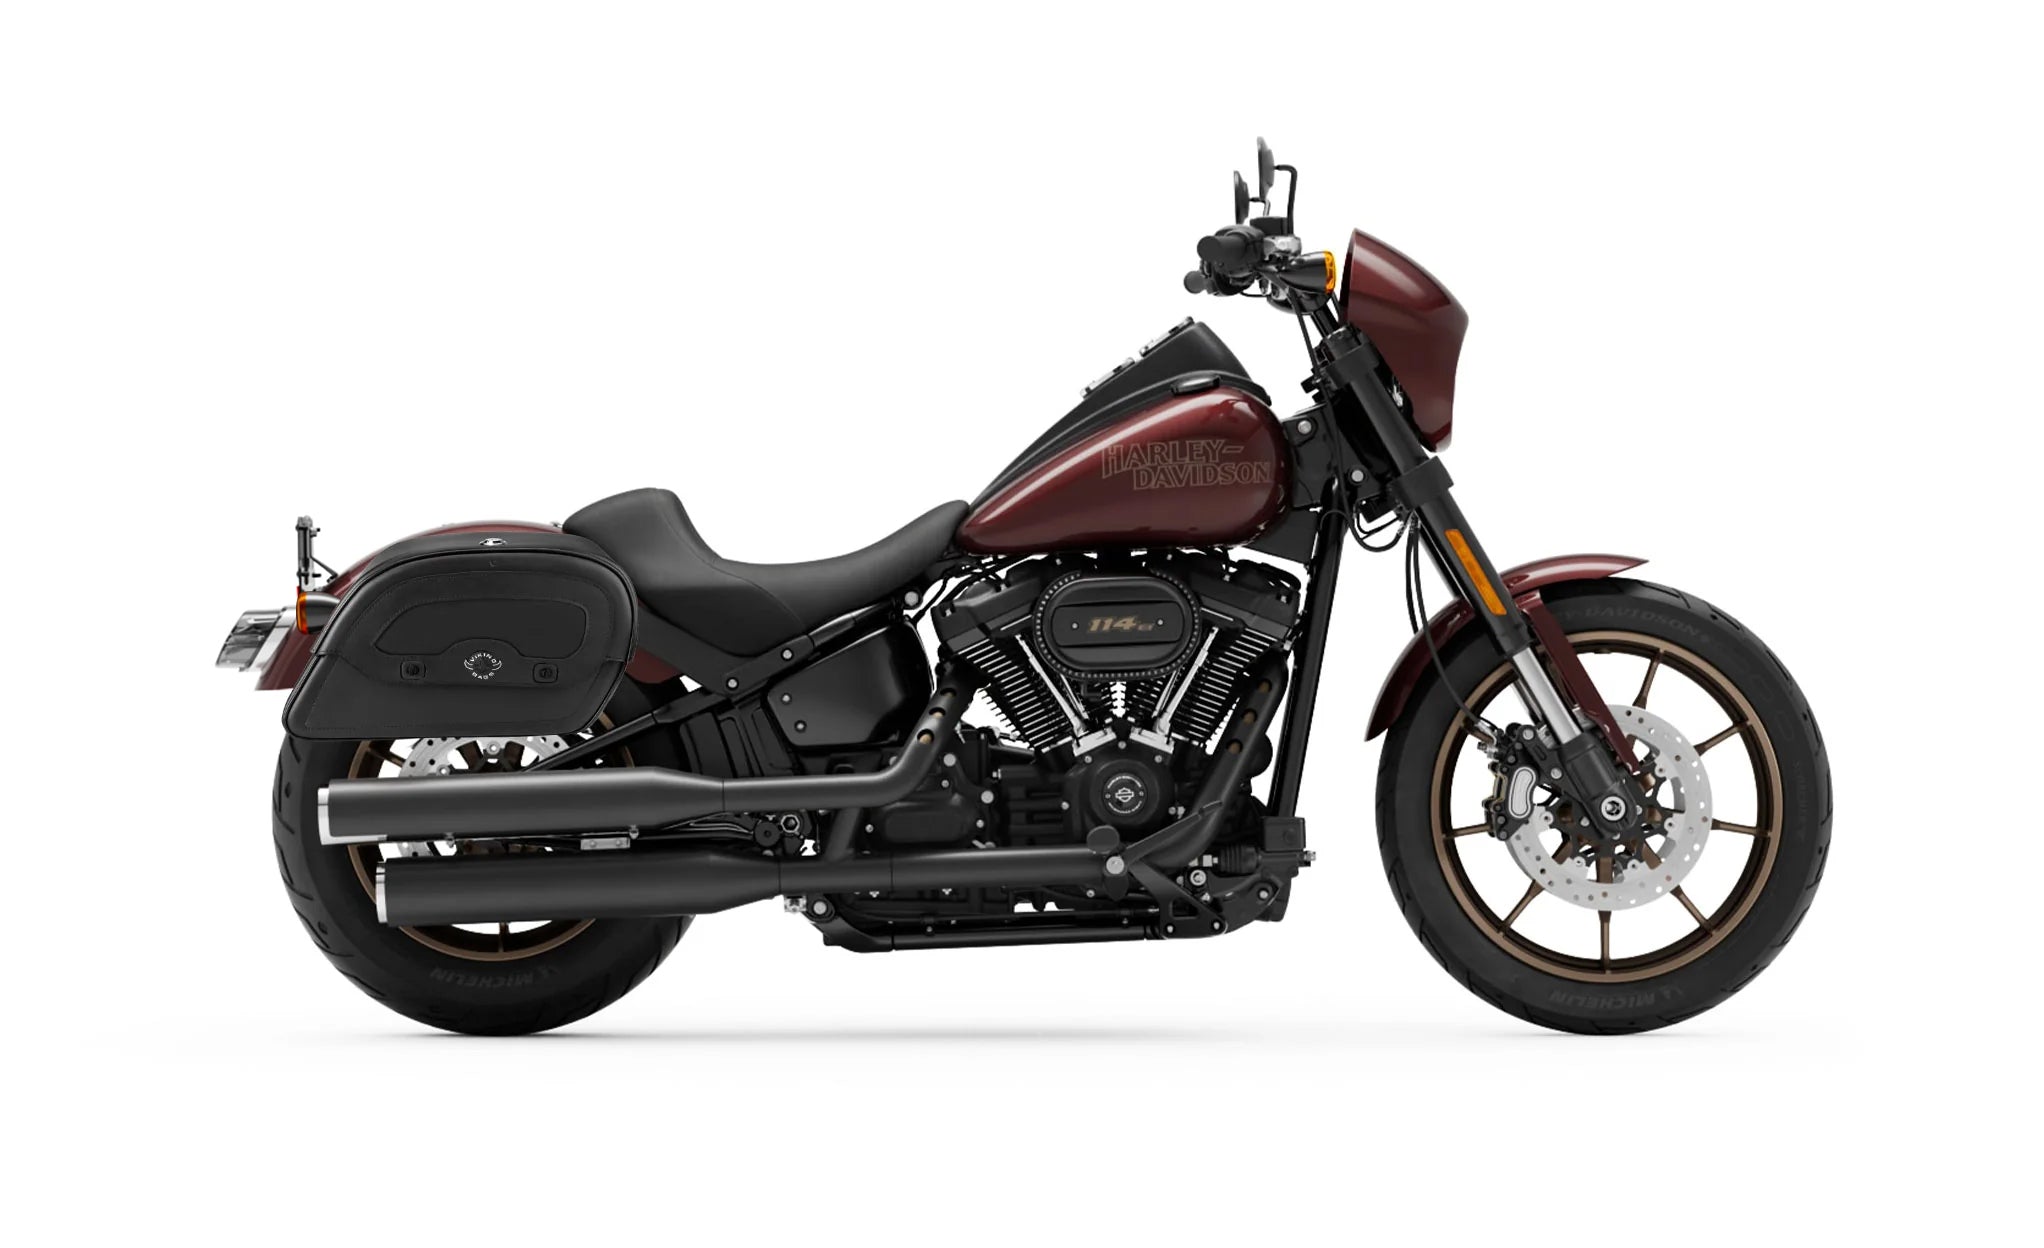 Viking Warrior Medium Leather Motorcycle Saddlebags For Harley Softail Low Rider S Fxlrs on Bike Photo @expand